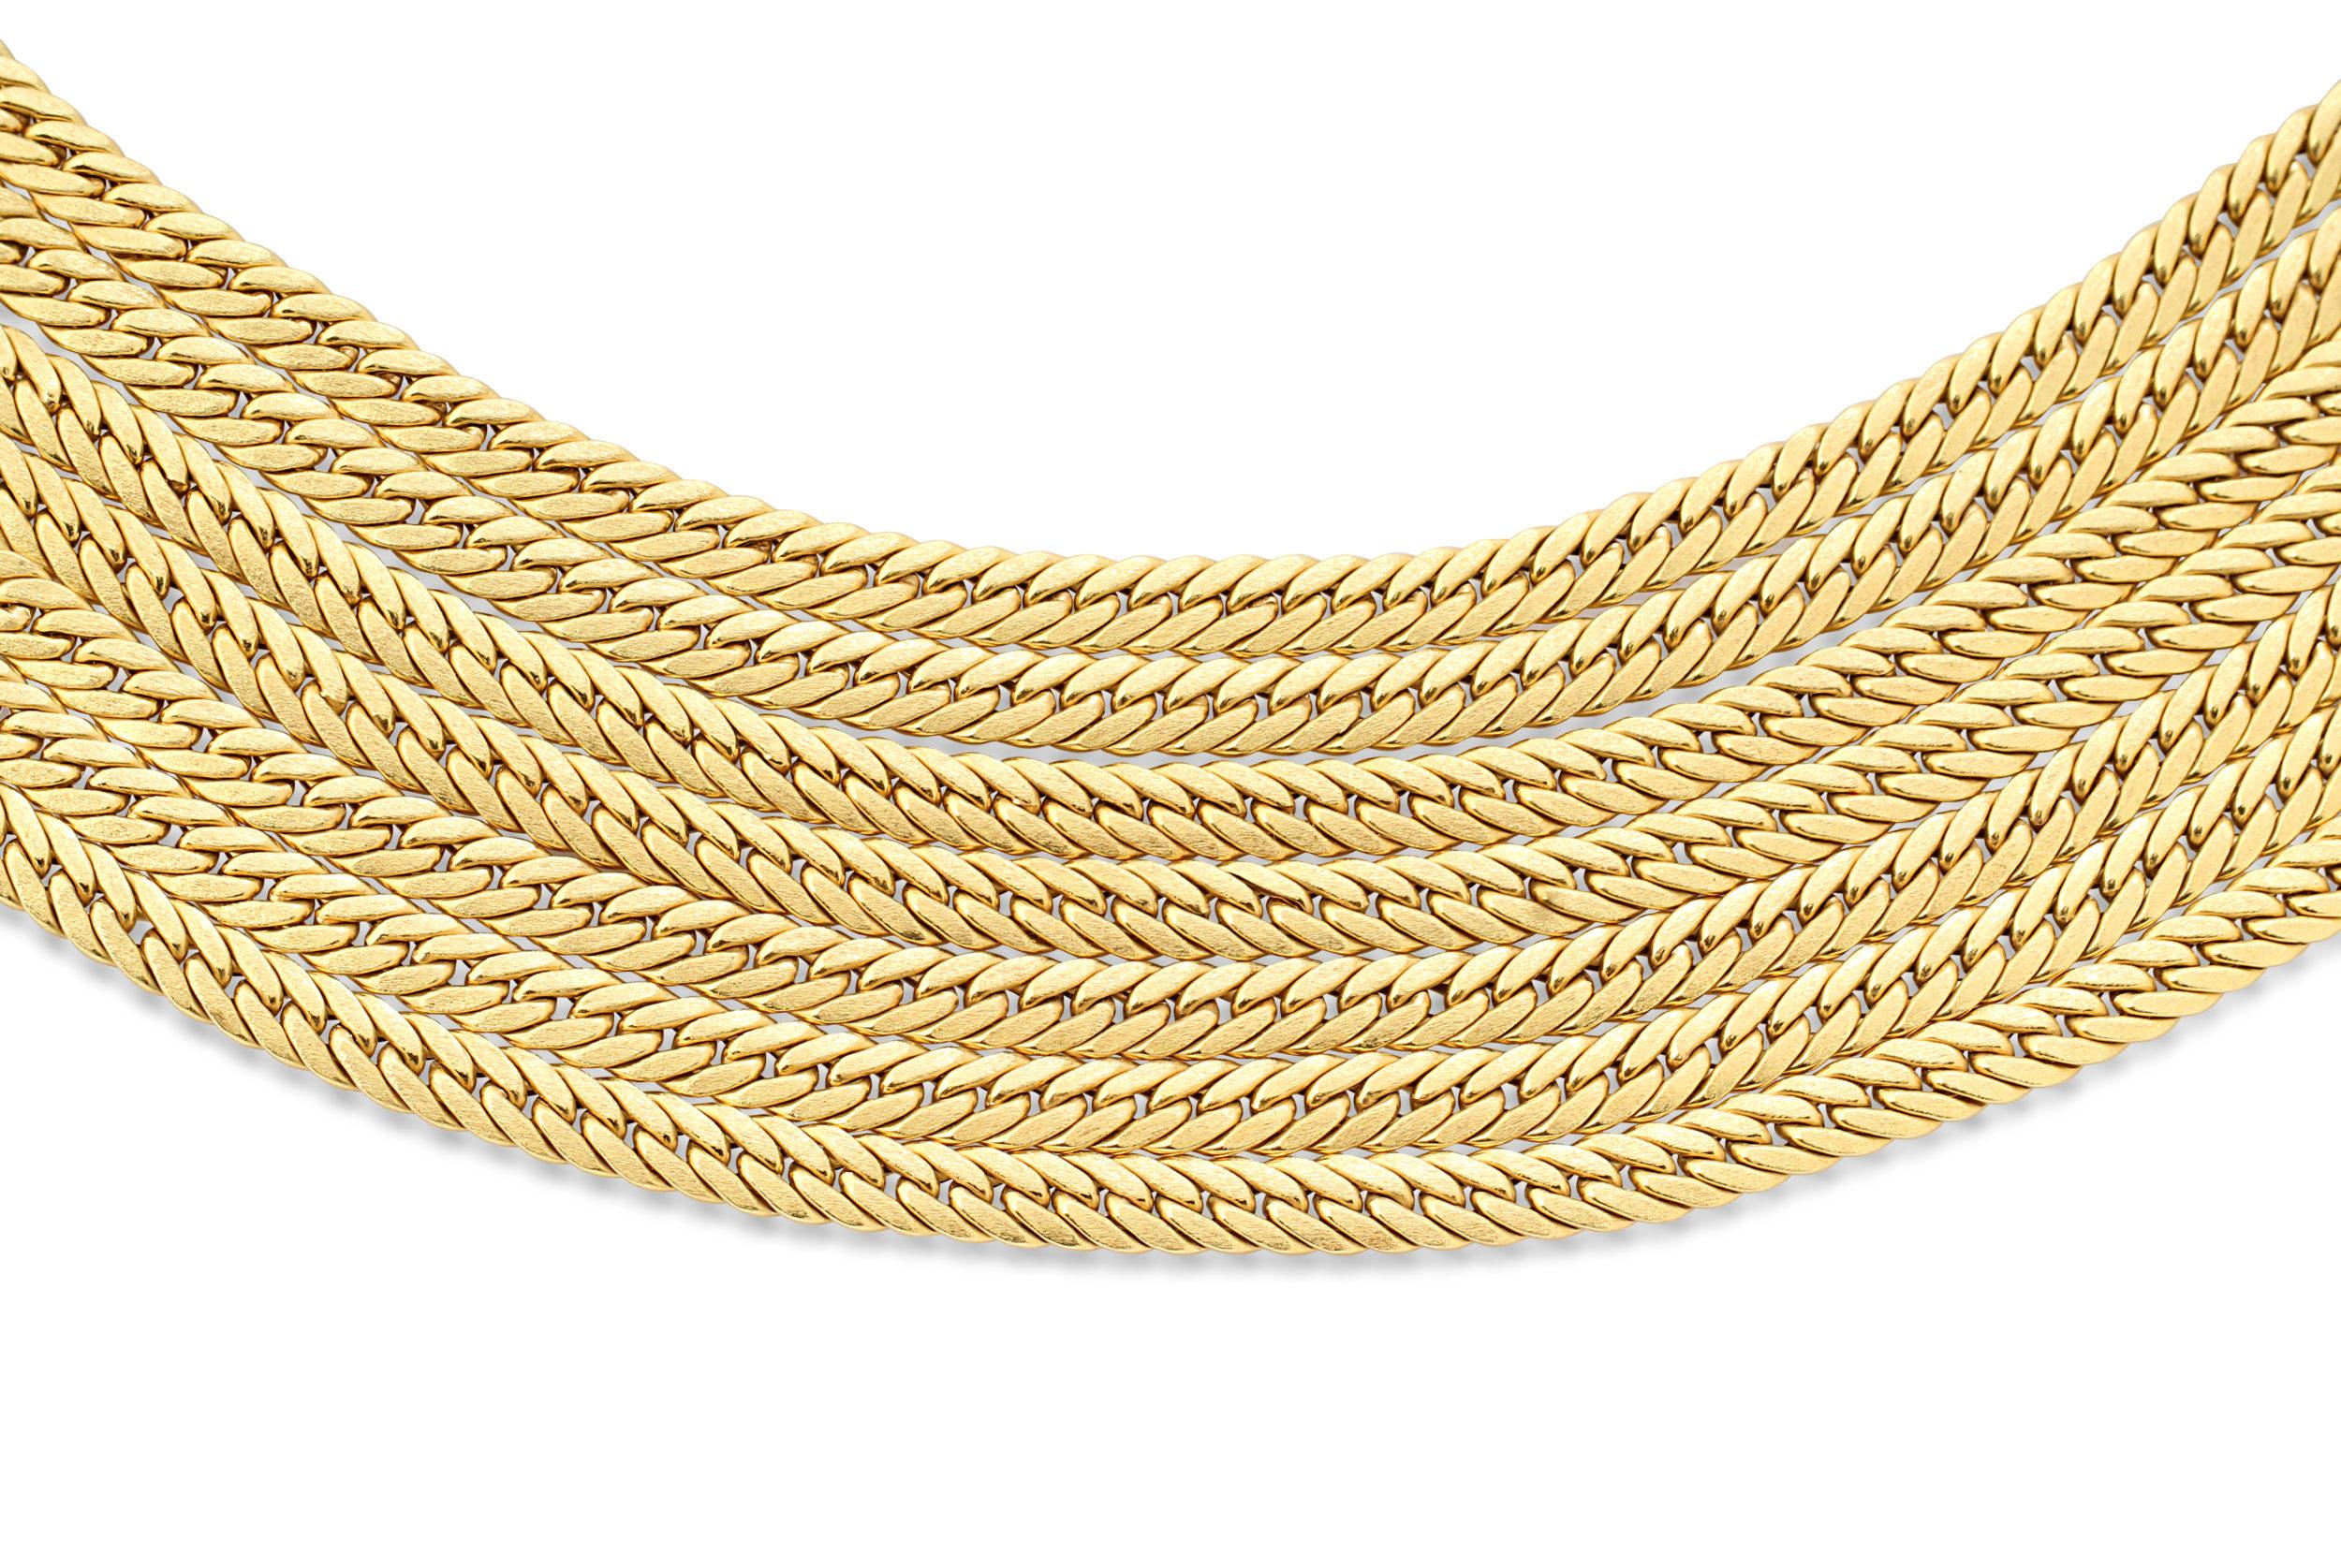 An 18k gold necklace made up of 7 rows of braided chains. The beautiful brushed finished texture combined with the braided design gives this necklace a classic stylish finish. Circa 1970s. Weight = 133.9gr.